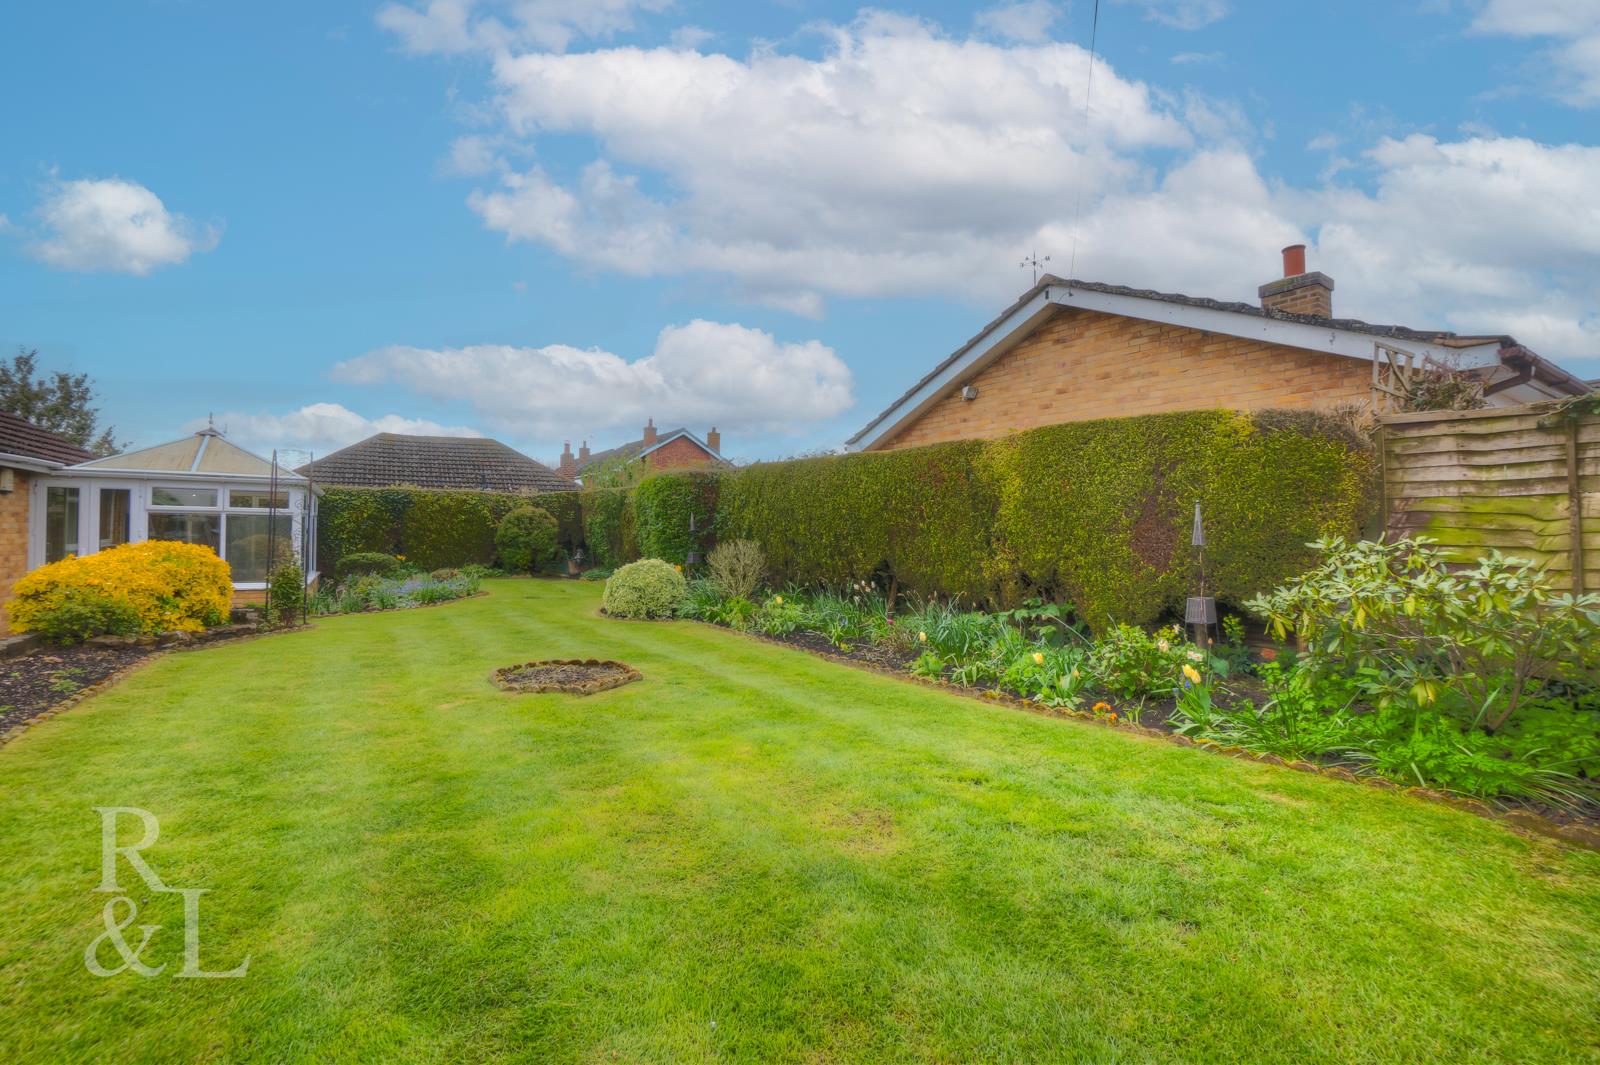 Property image for Harles Acres, Hickling, Melton Mowbray